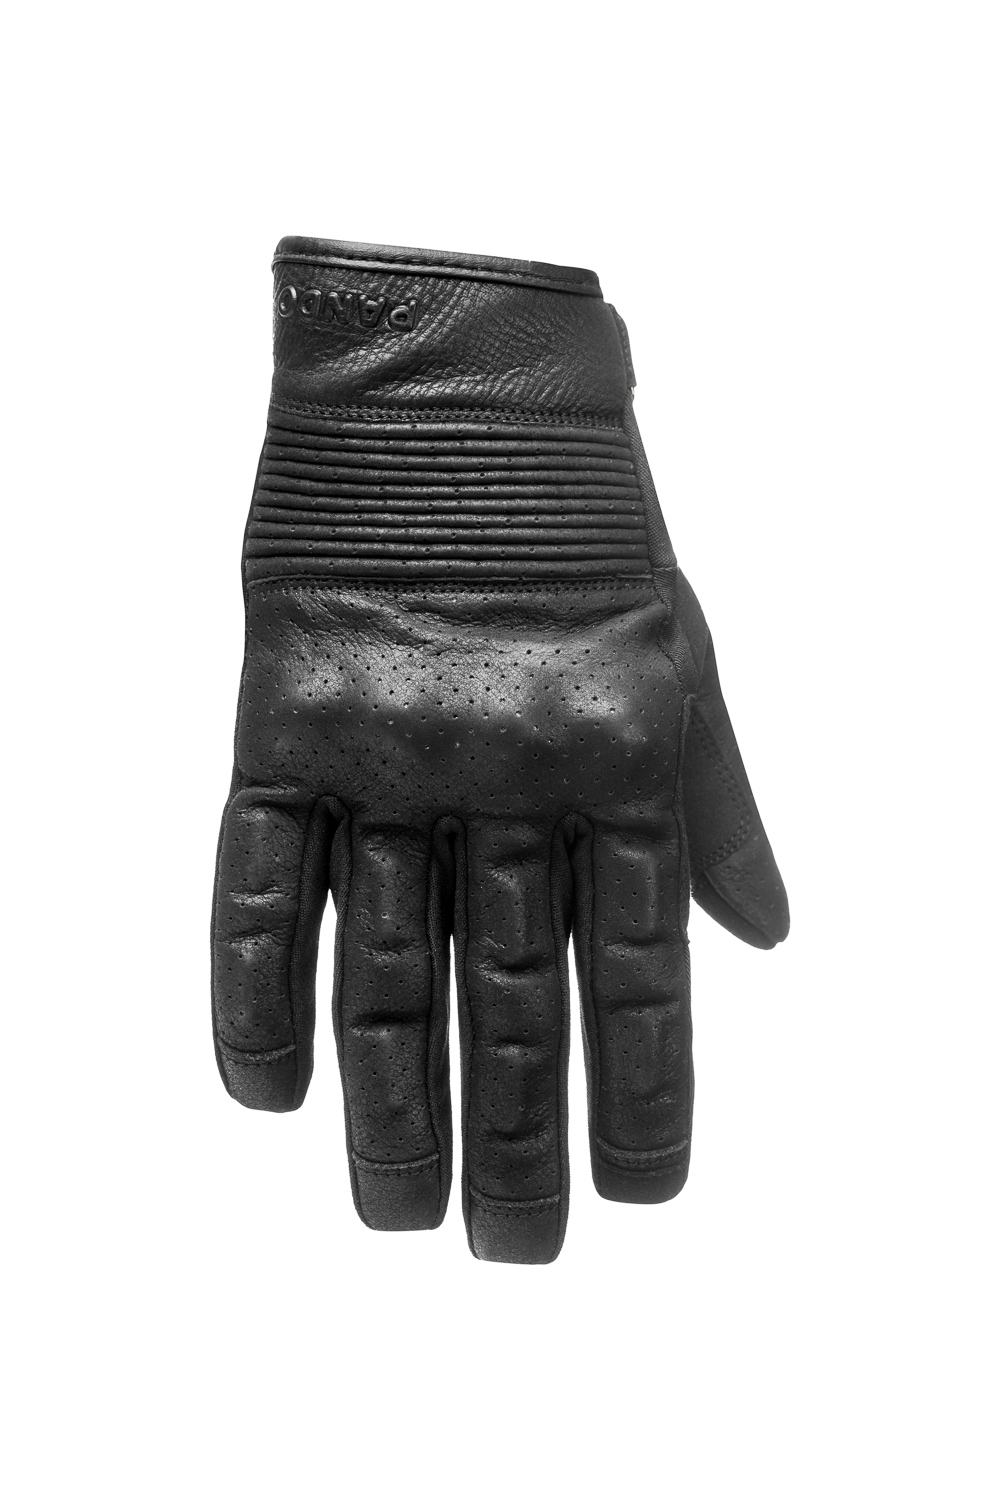 ONYX BLACK - Leather Motorcycle Gloves 2